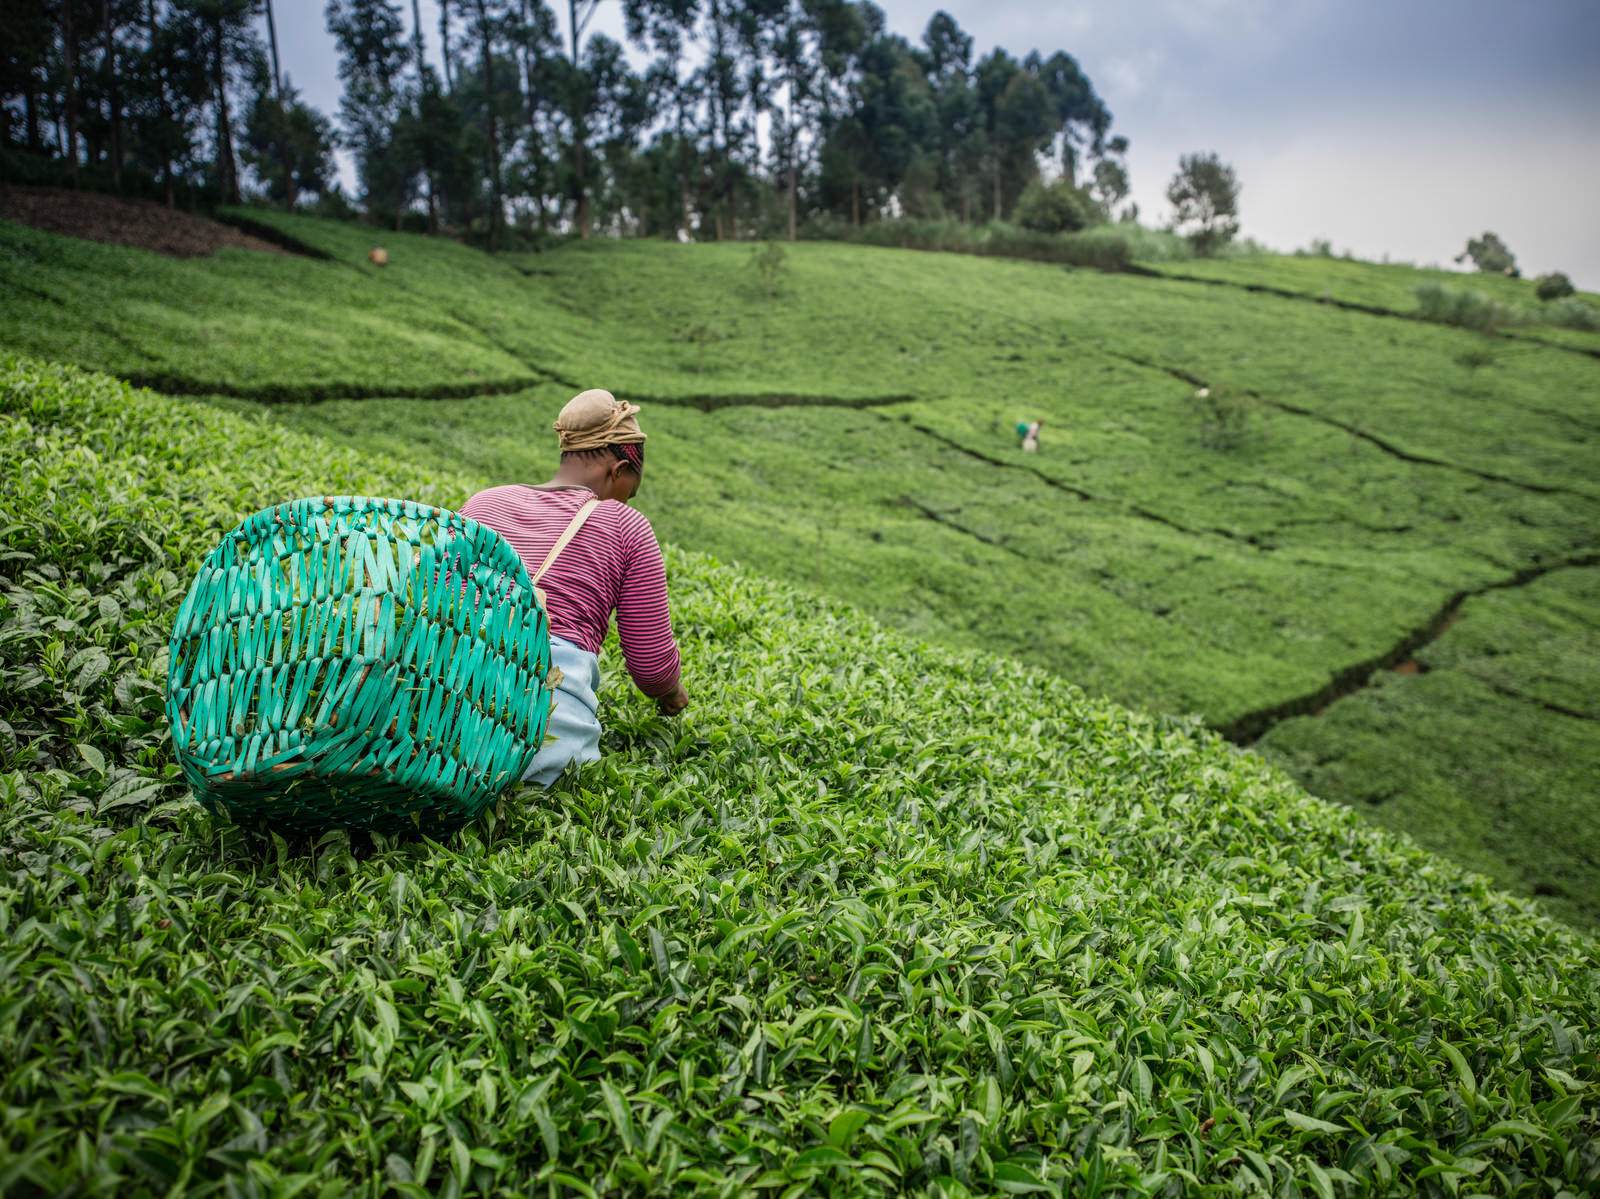 A woman with a basket on her back picks tea leaves in a green tea field.